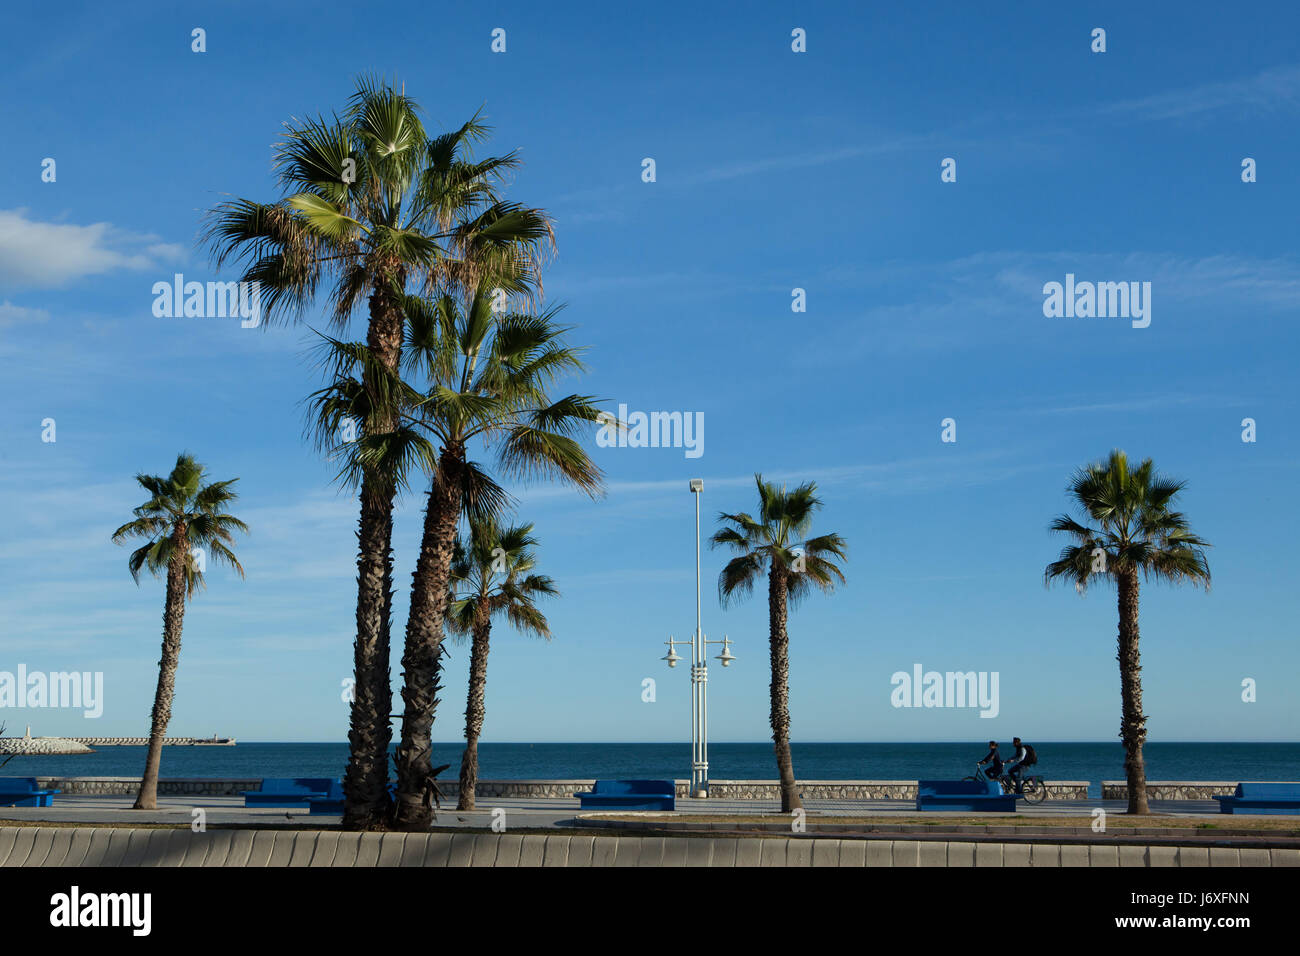 Palm trees on the sea front in Malaga, Costa del Sol, Andalusia, Spain. Stock Photo